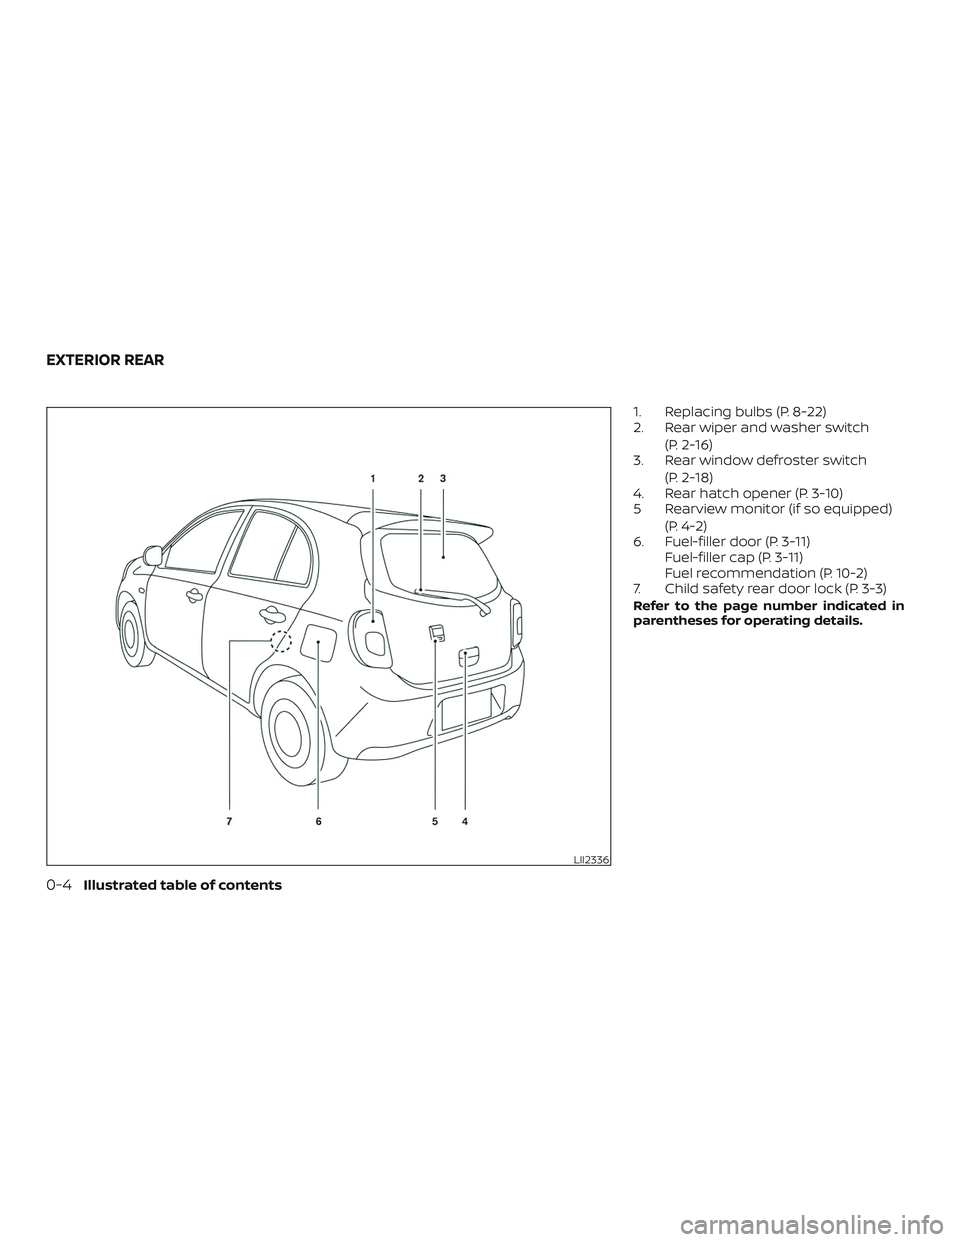 NISSAN MICRA 2018  Owner´s Manual 1. Replacing bulbs (P. 8-22)
2. Rear wiper and washer switch(P. 2-16)
3. Rear window defroster switch
(P. 2-18)
4. Rear hatch opener (P. 3-10)
5 Rearview monitor (if so equipped)
(P. 4-2)
6. Fuel-fill